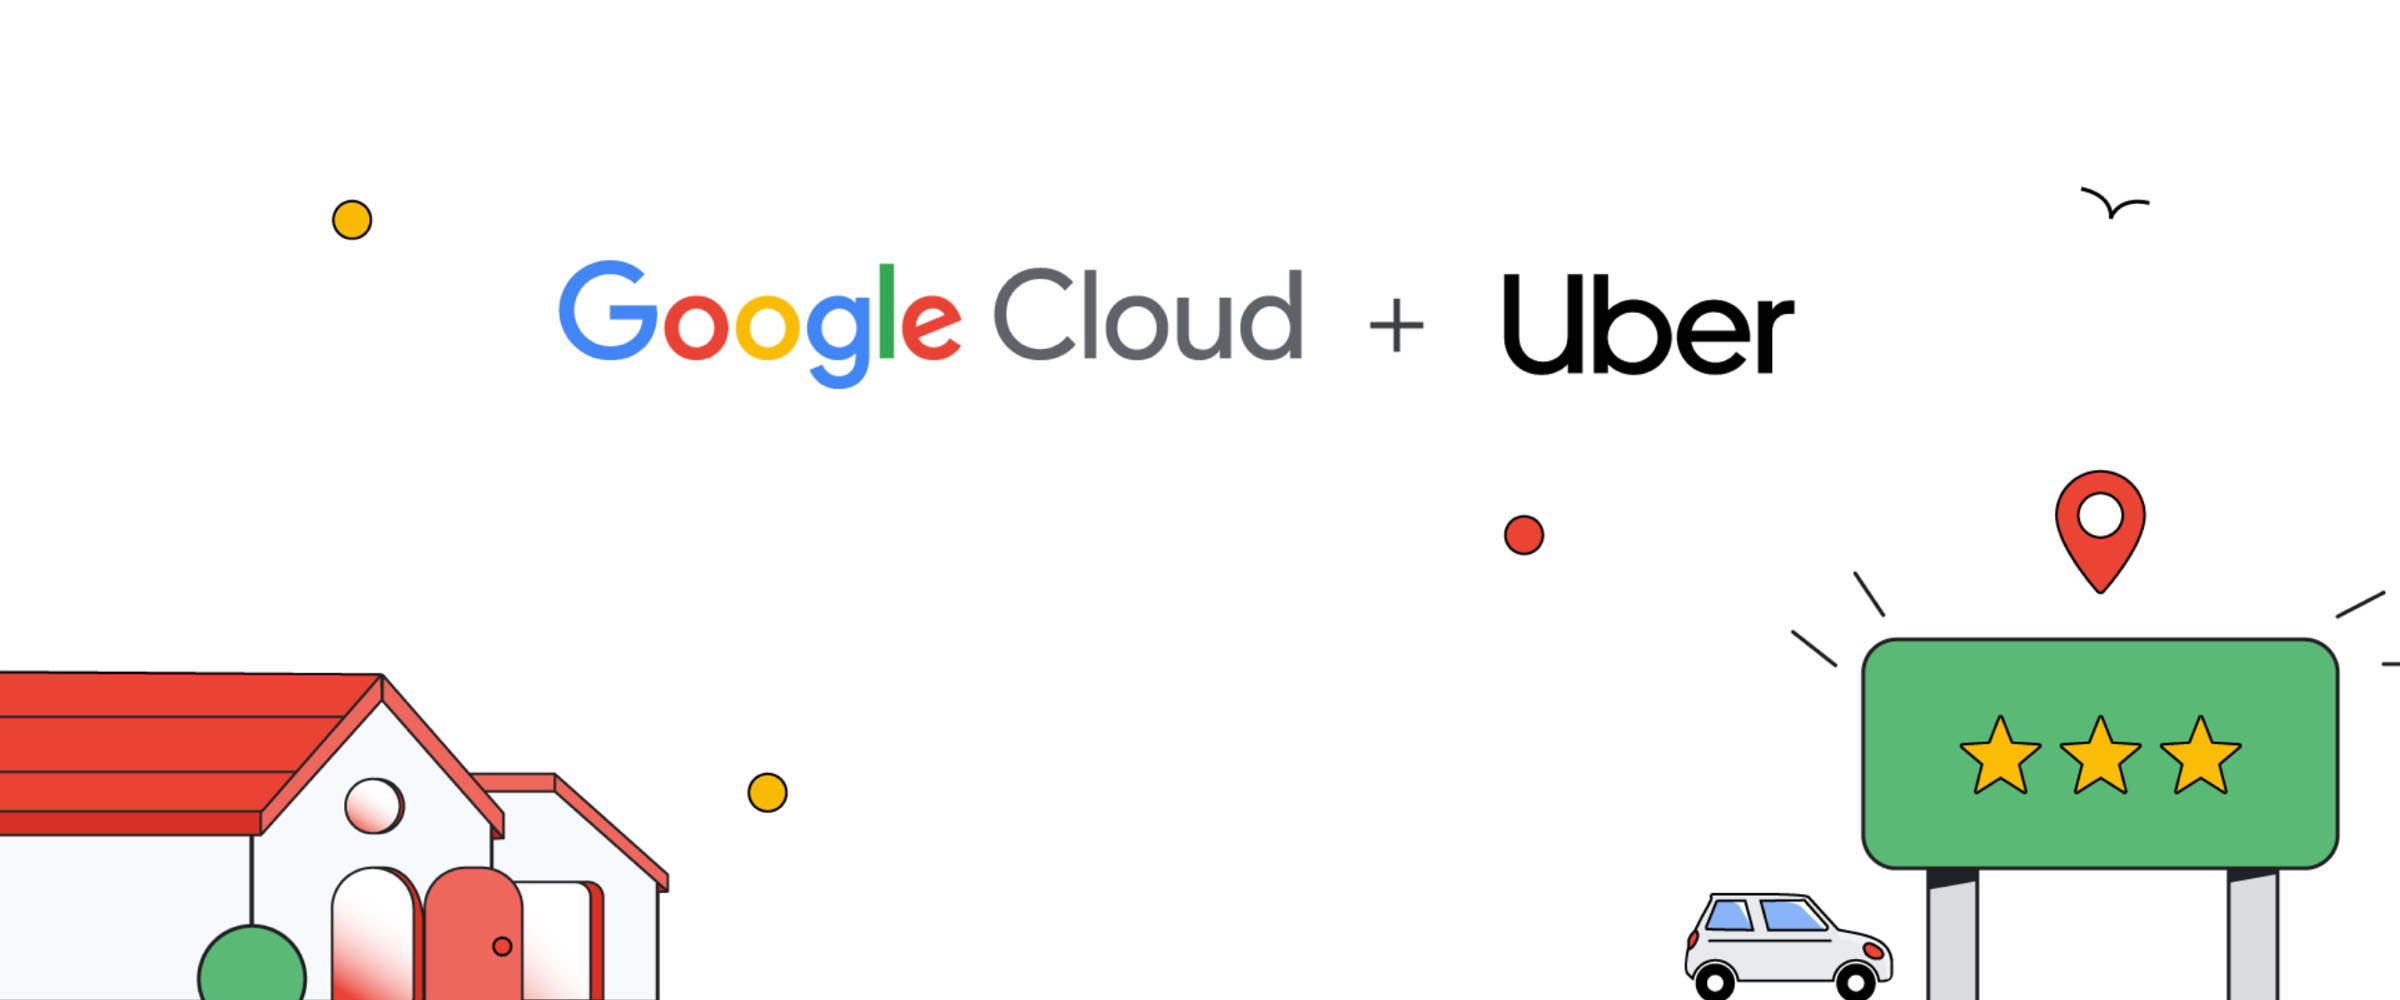 Google and Uber Deepen Partnership to Reimagine the Customer Experience